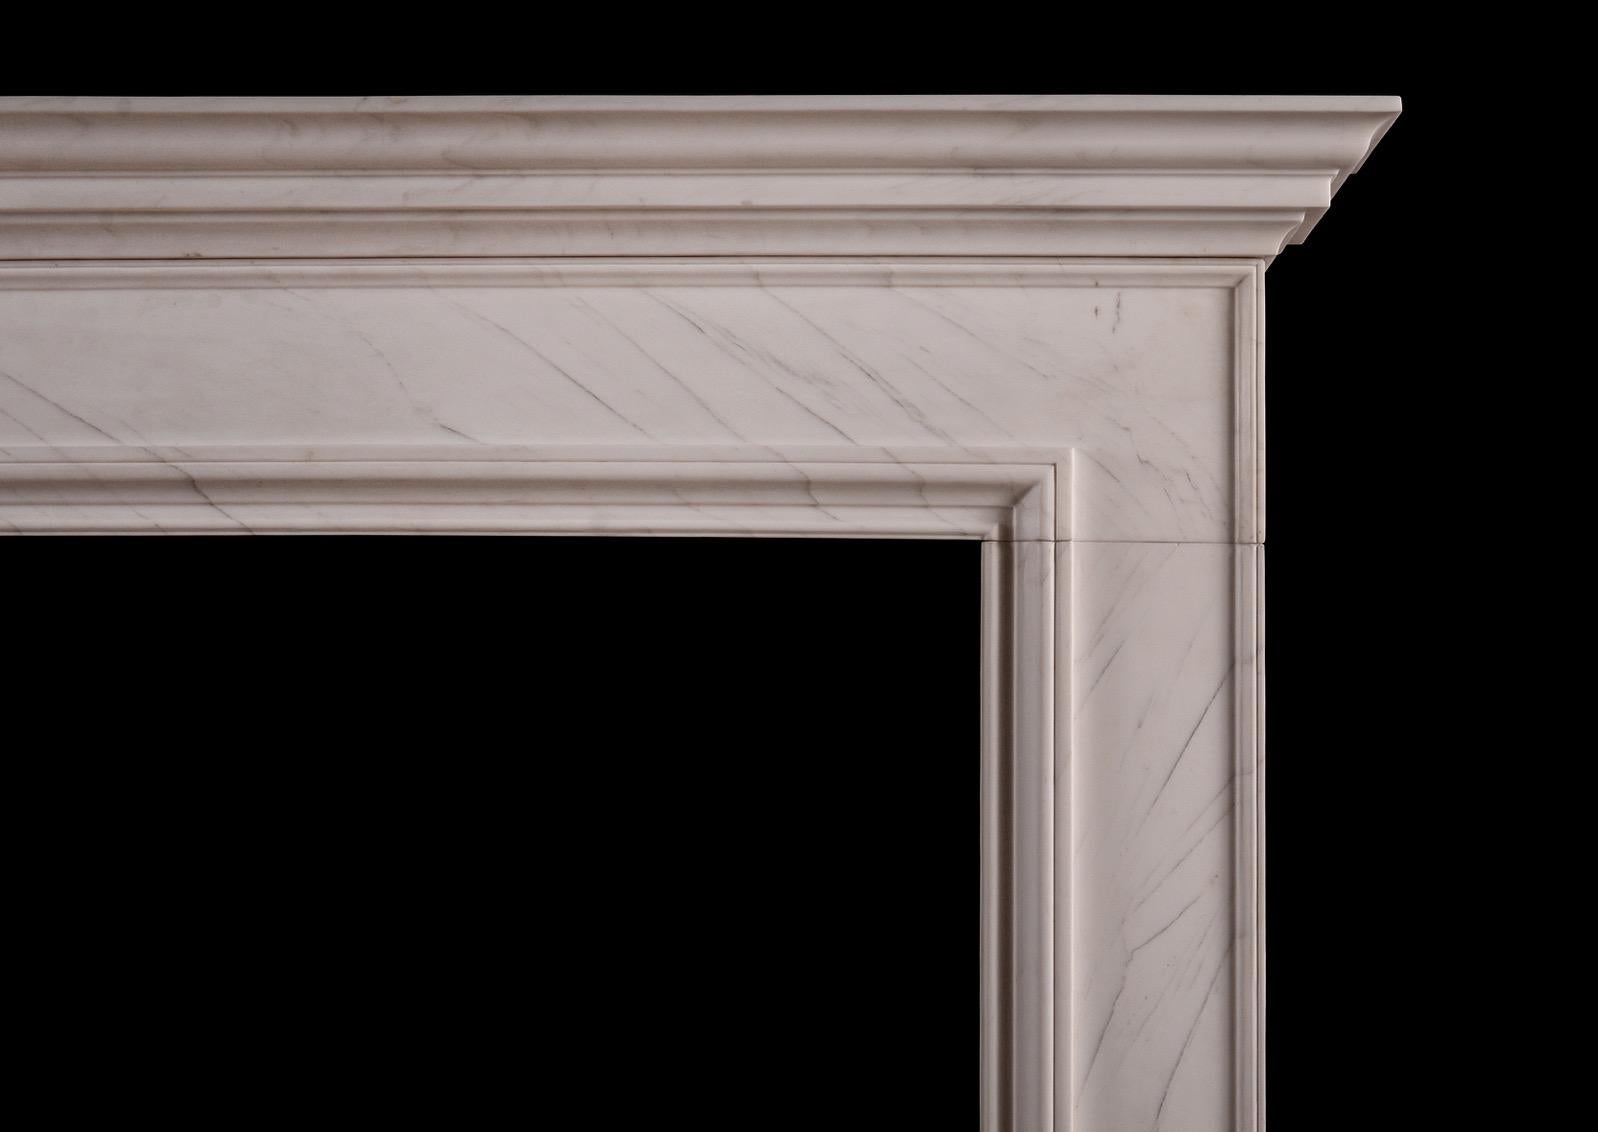 A simple white marble fireplace of architectural form. The moulded frieze and jambs surmounted by moulded shelf above. English design. Modern.

N.B. May be subject to an extended lead time, please enquire for more information.

Measure: 
Shelf